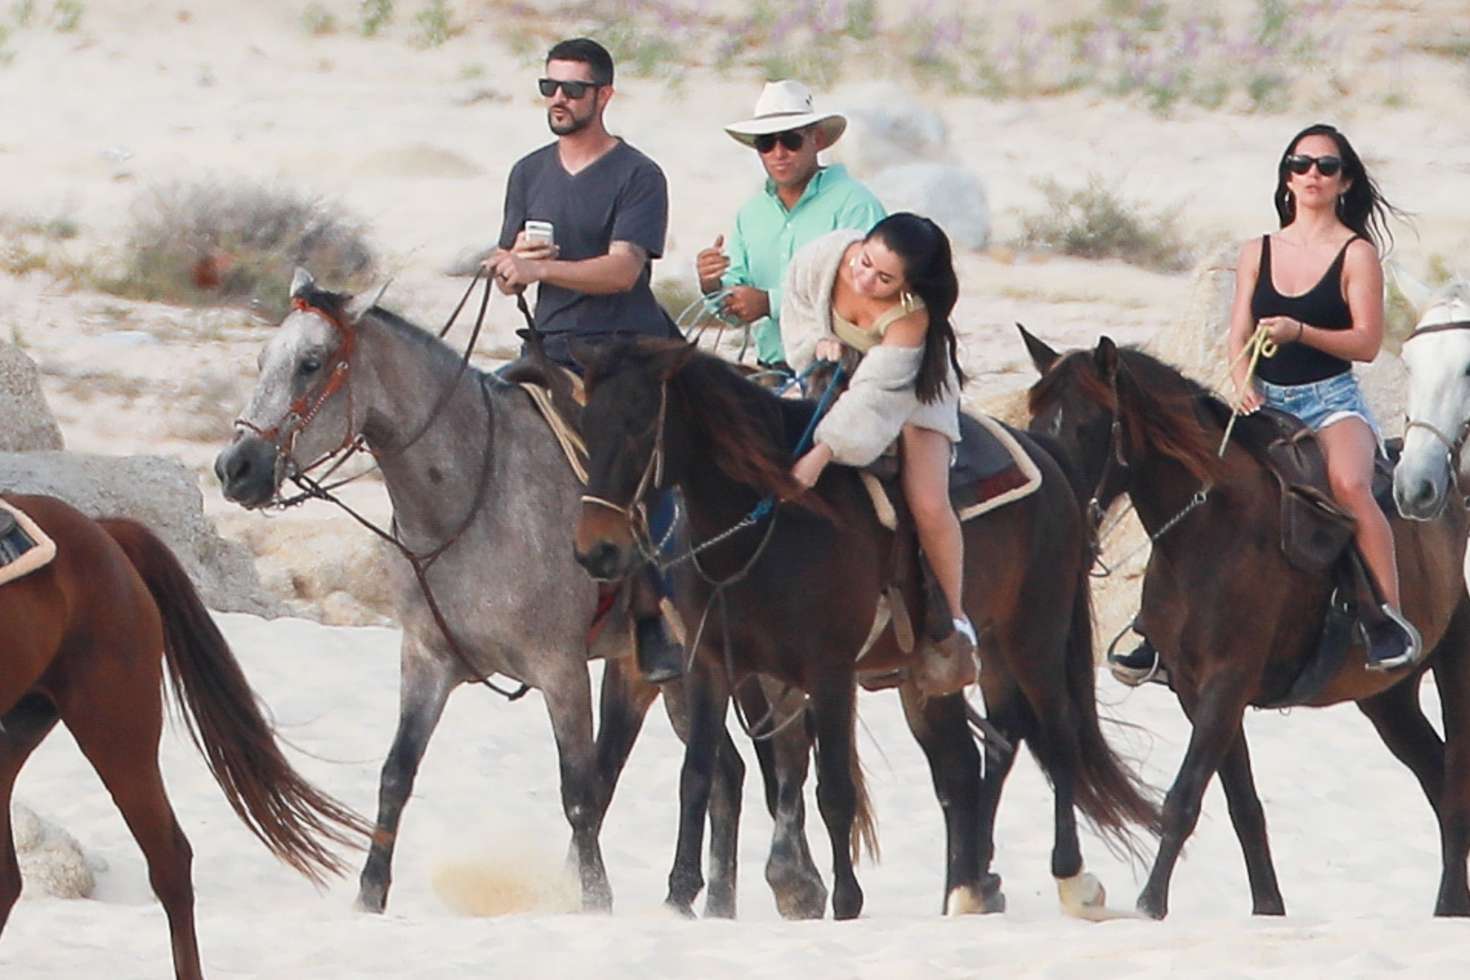 Selena Gomez â€“ Riding a horse with friends in Cabo San Lucas